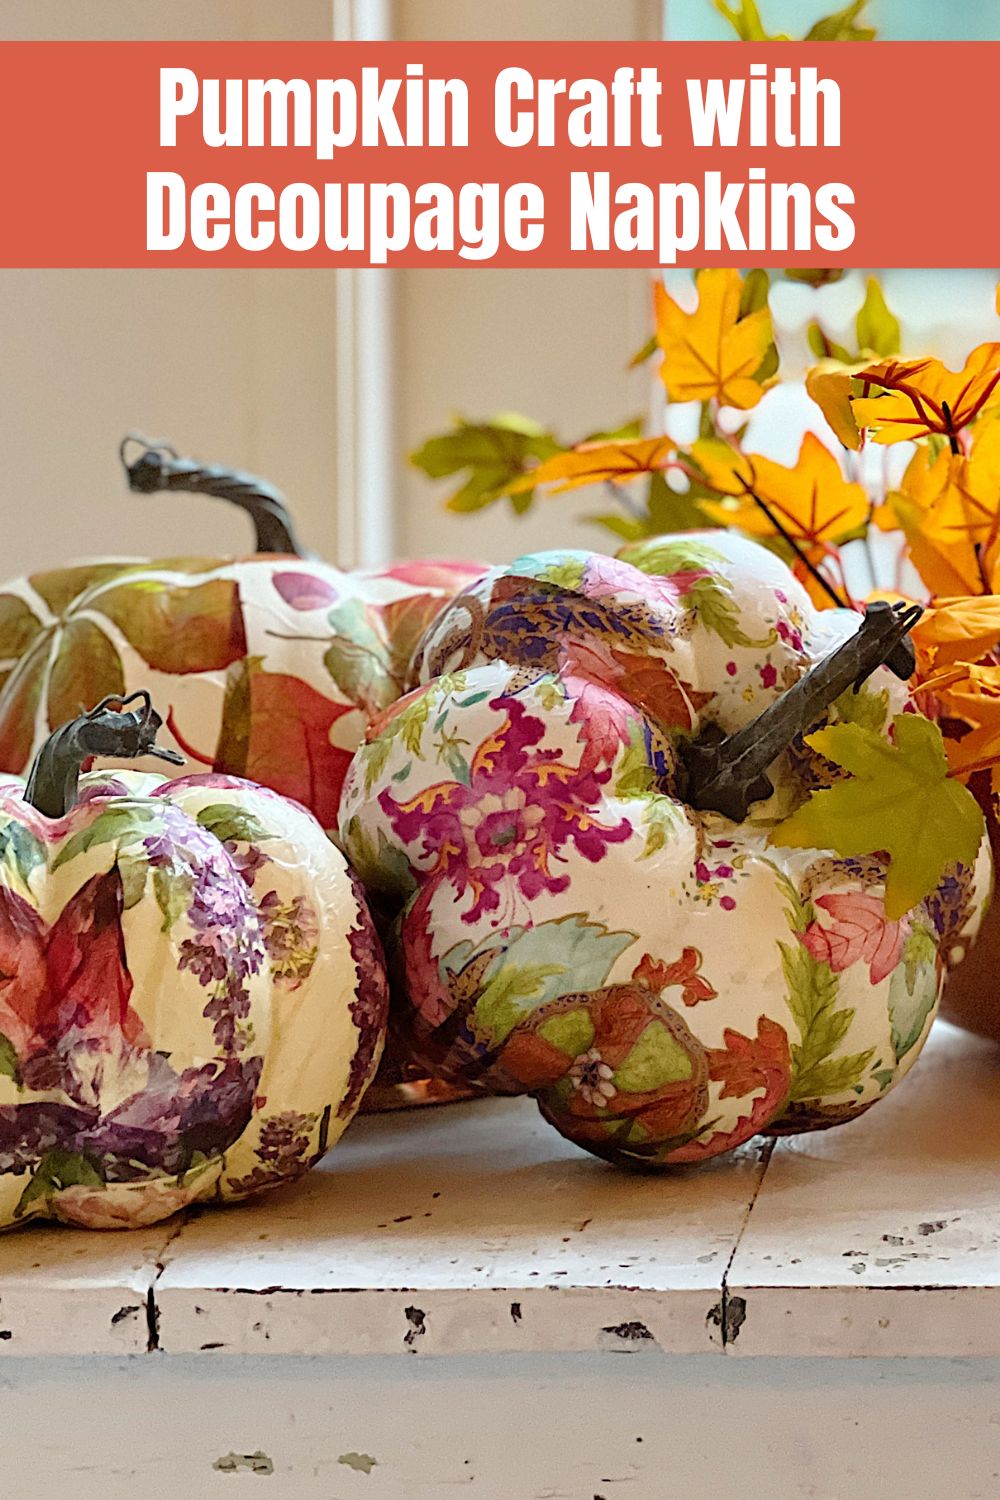 Every fall I make a pumpkin craft. This year, I repurposed some old faux pumpkins and added decoupage napkins to them.